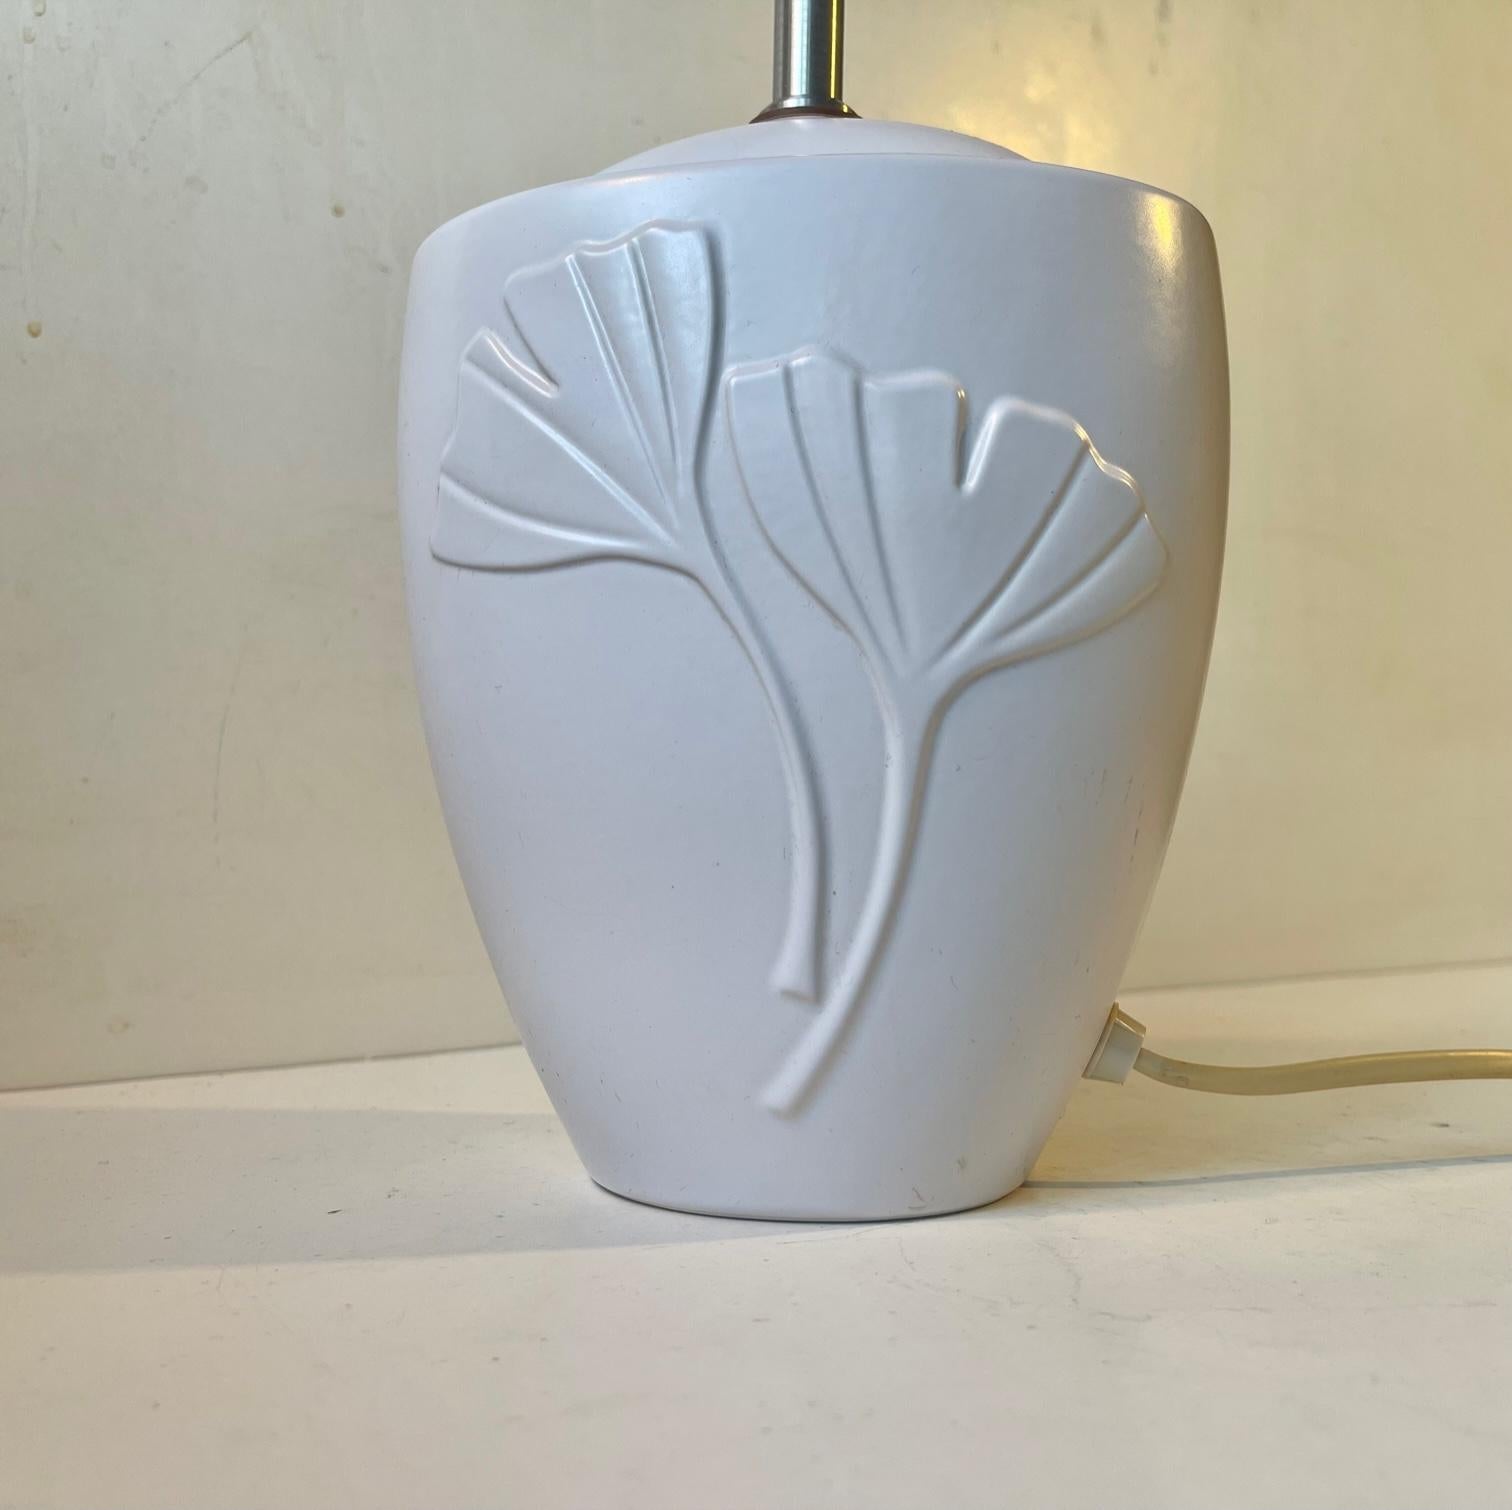 A white glazed table light featuring stylized relief flowers and fluted white shade. Art Deco revival in style. Made at Søholm in Denmark circa 1970-80. Measurements: H: 40 cm, Diameter: 30 cm. 
For the US. It will come installed with a 110 watt